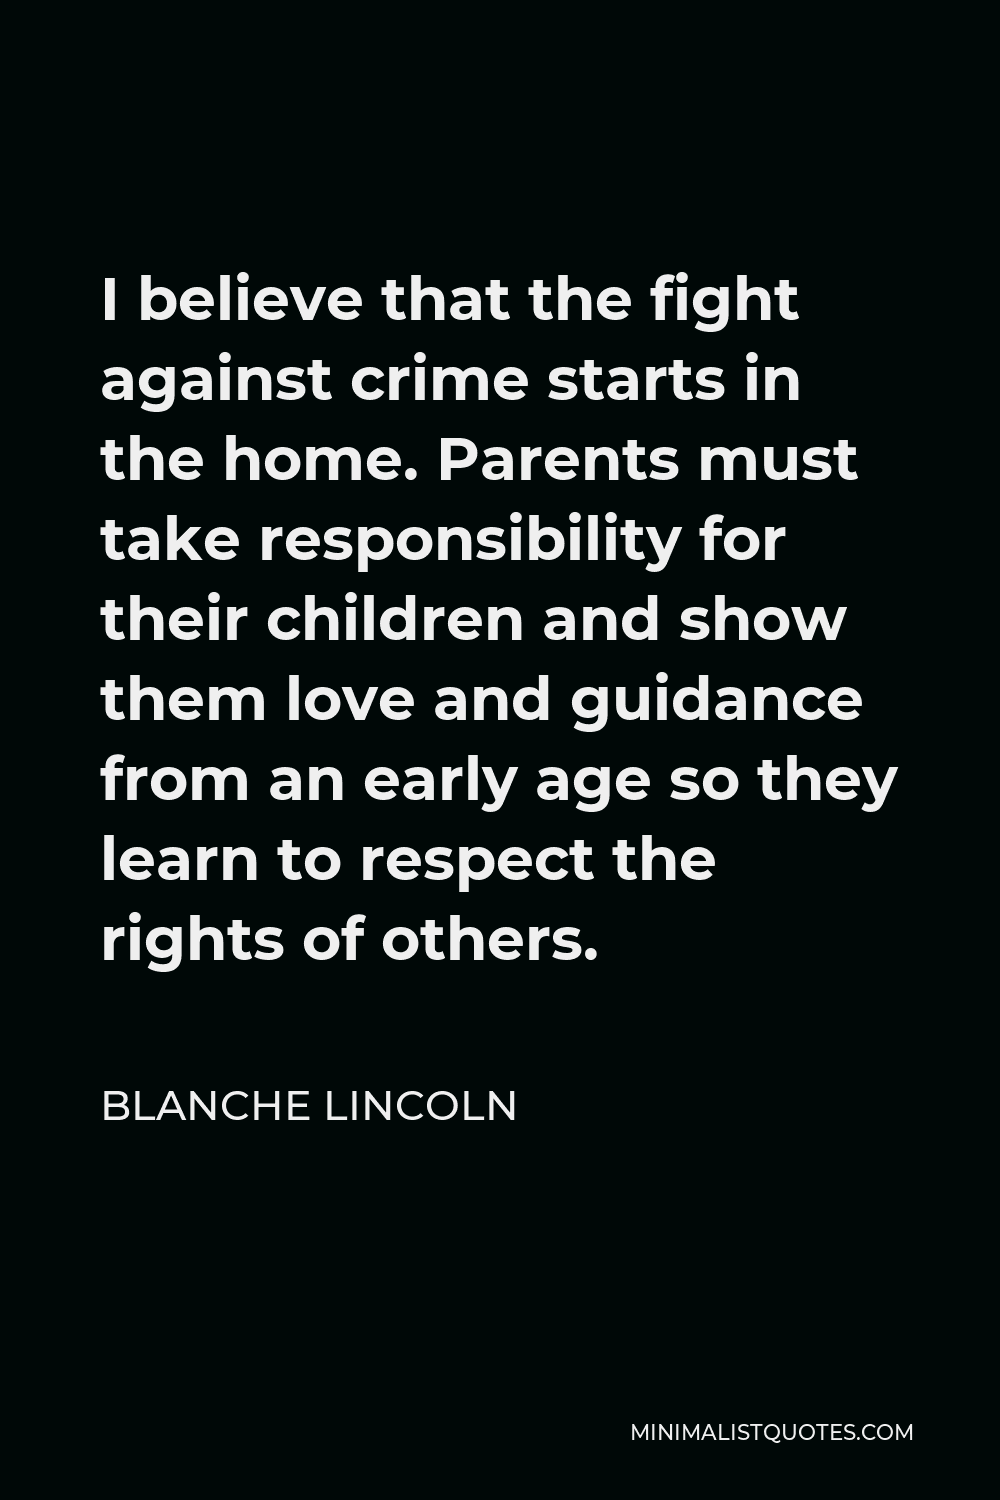 Blanche Lincoln Quote - I believe that the fight against crime starts in the home. Parents must take responsibility for their children and show them love and guidance from an early age so they learn to respect the rights of others.